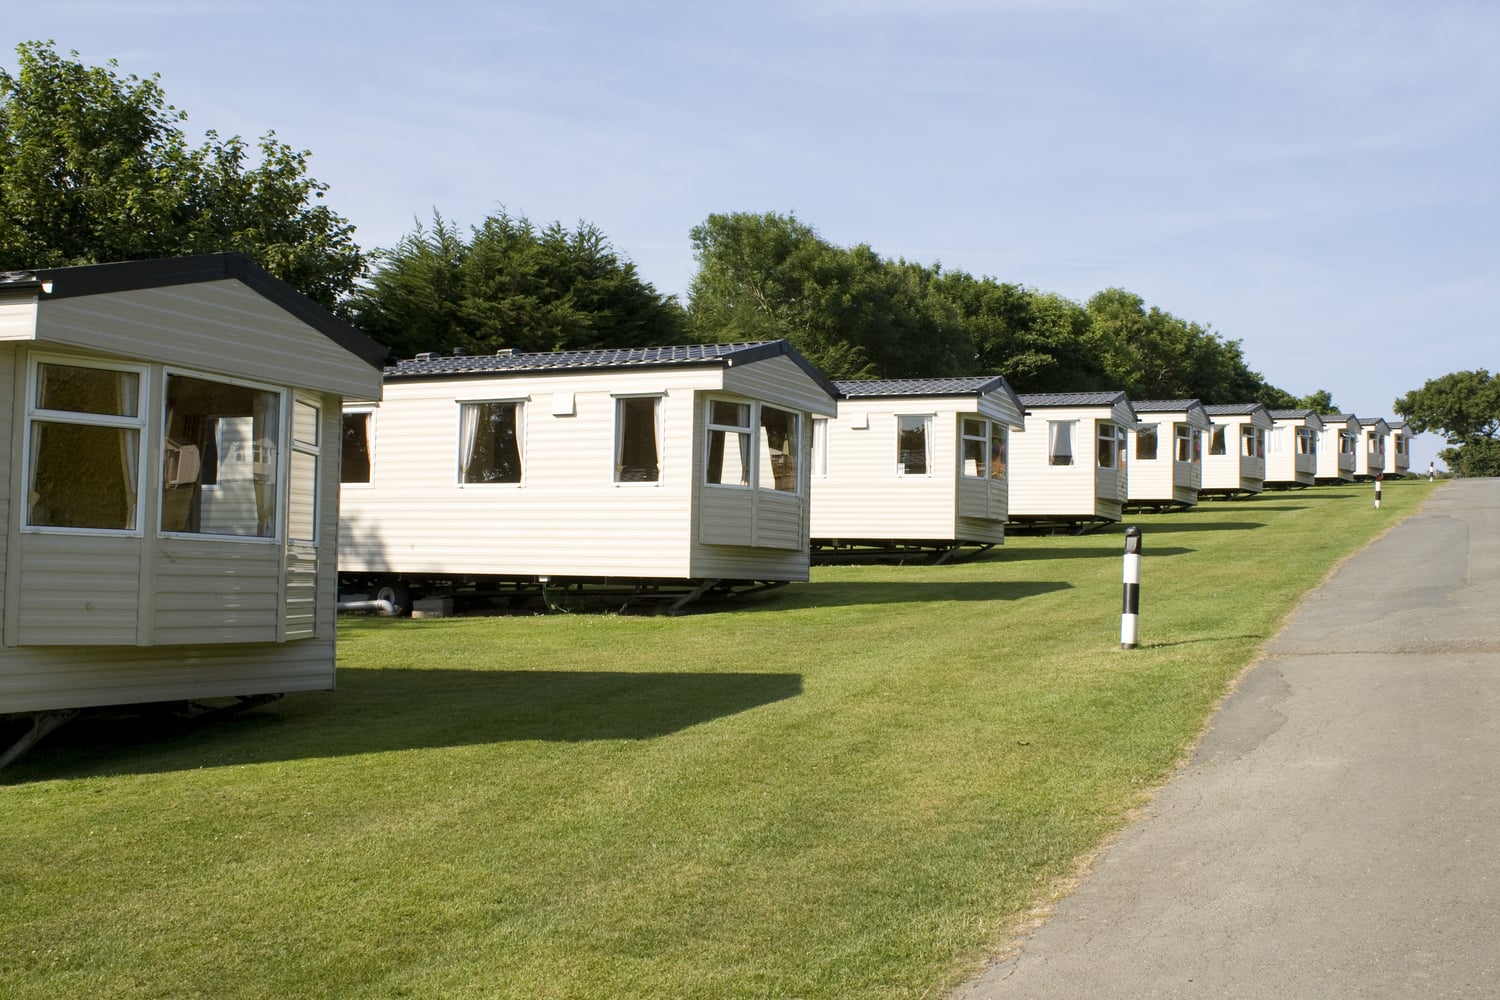 Row of static caravans in holiday park